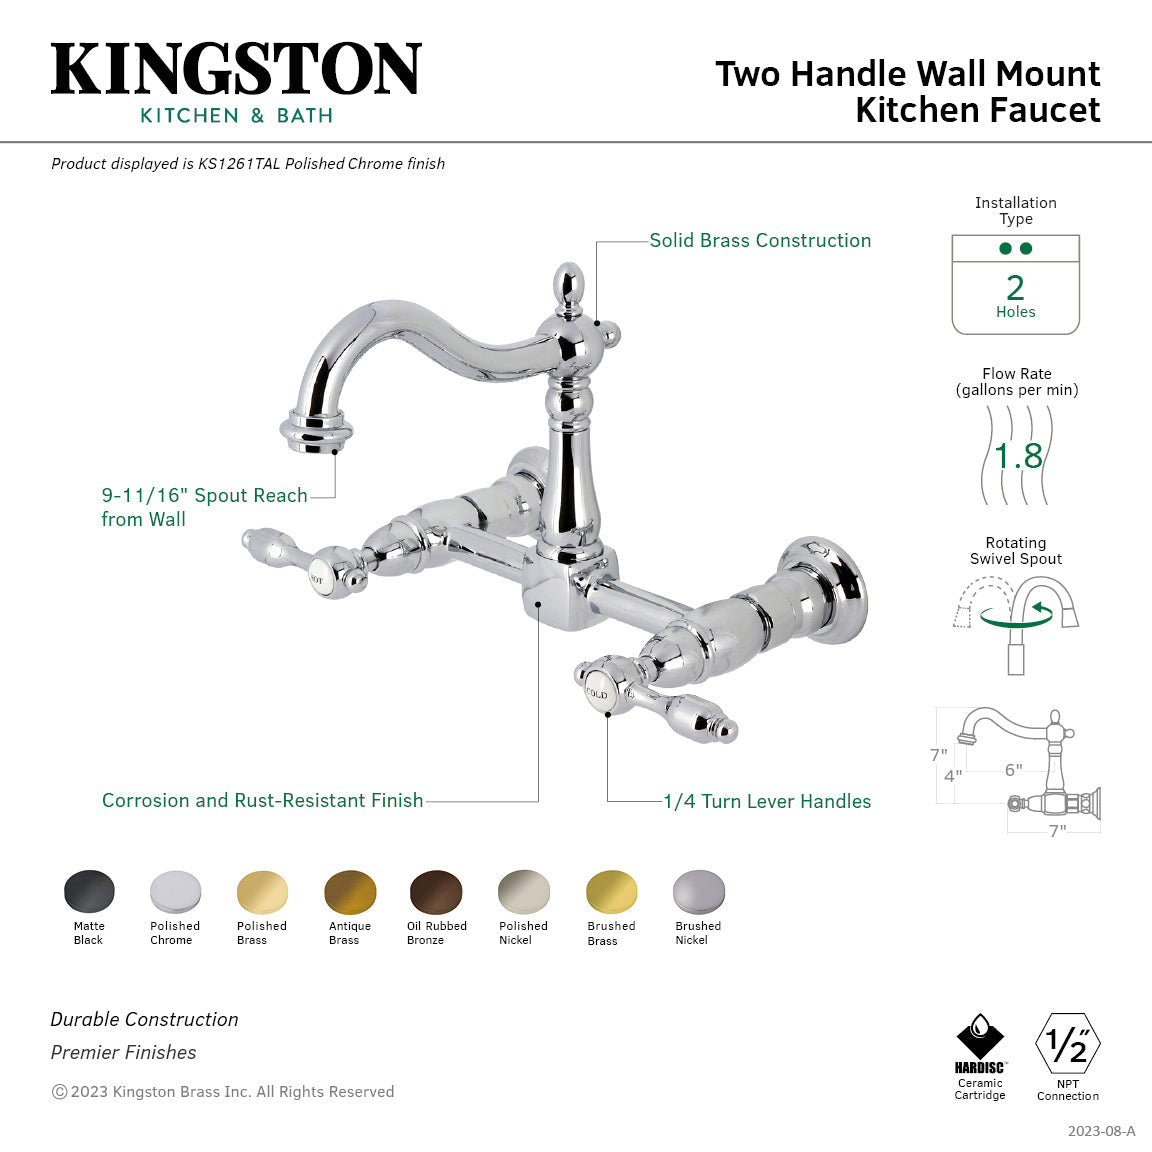 Tudor KS1268TAL Two-Handle 2-Hole Wall Mount Kitchen Faucet, Brushed Nickel